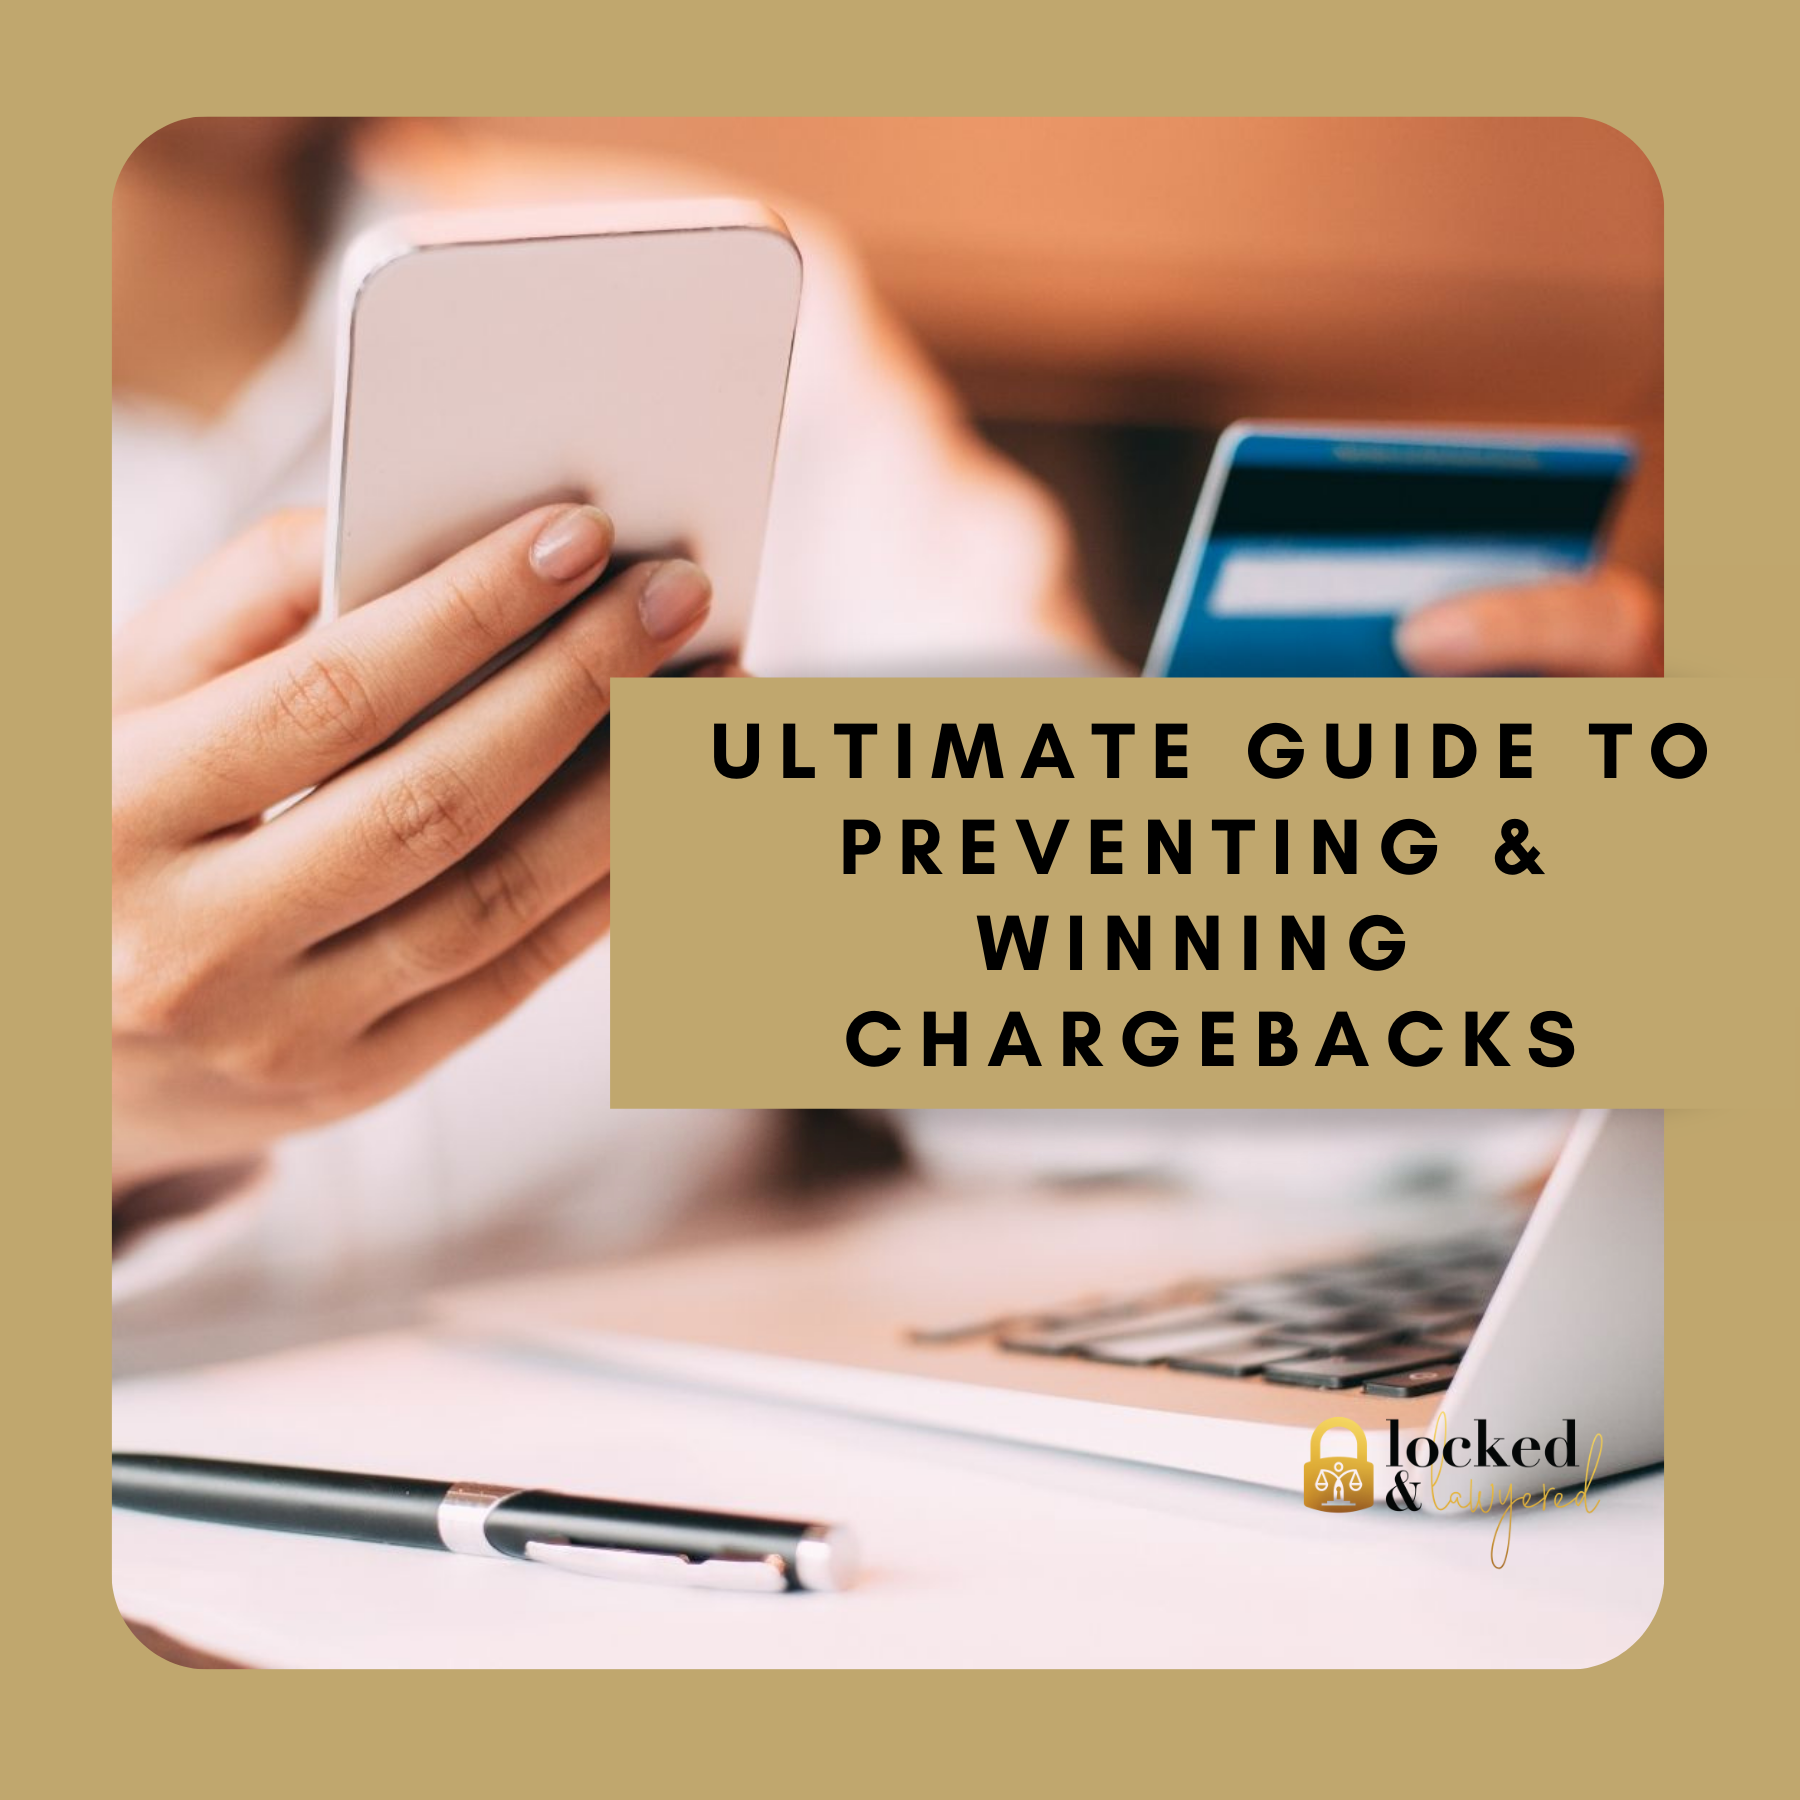 Ultimate Guide to Preventing & Winning Chargebacks